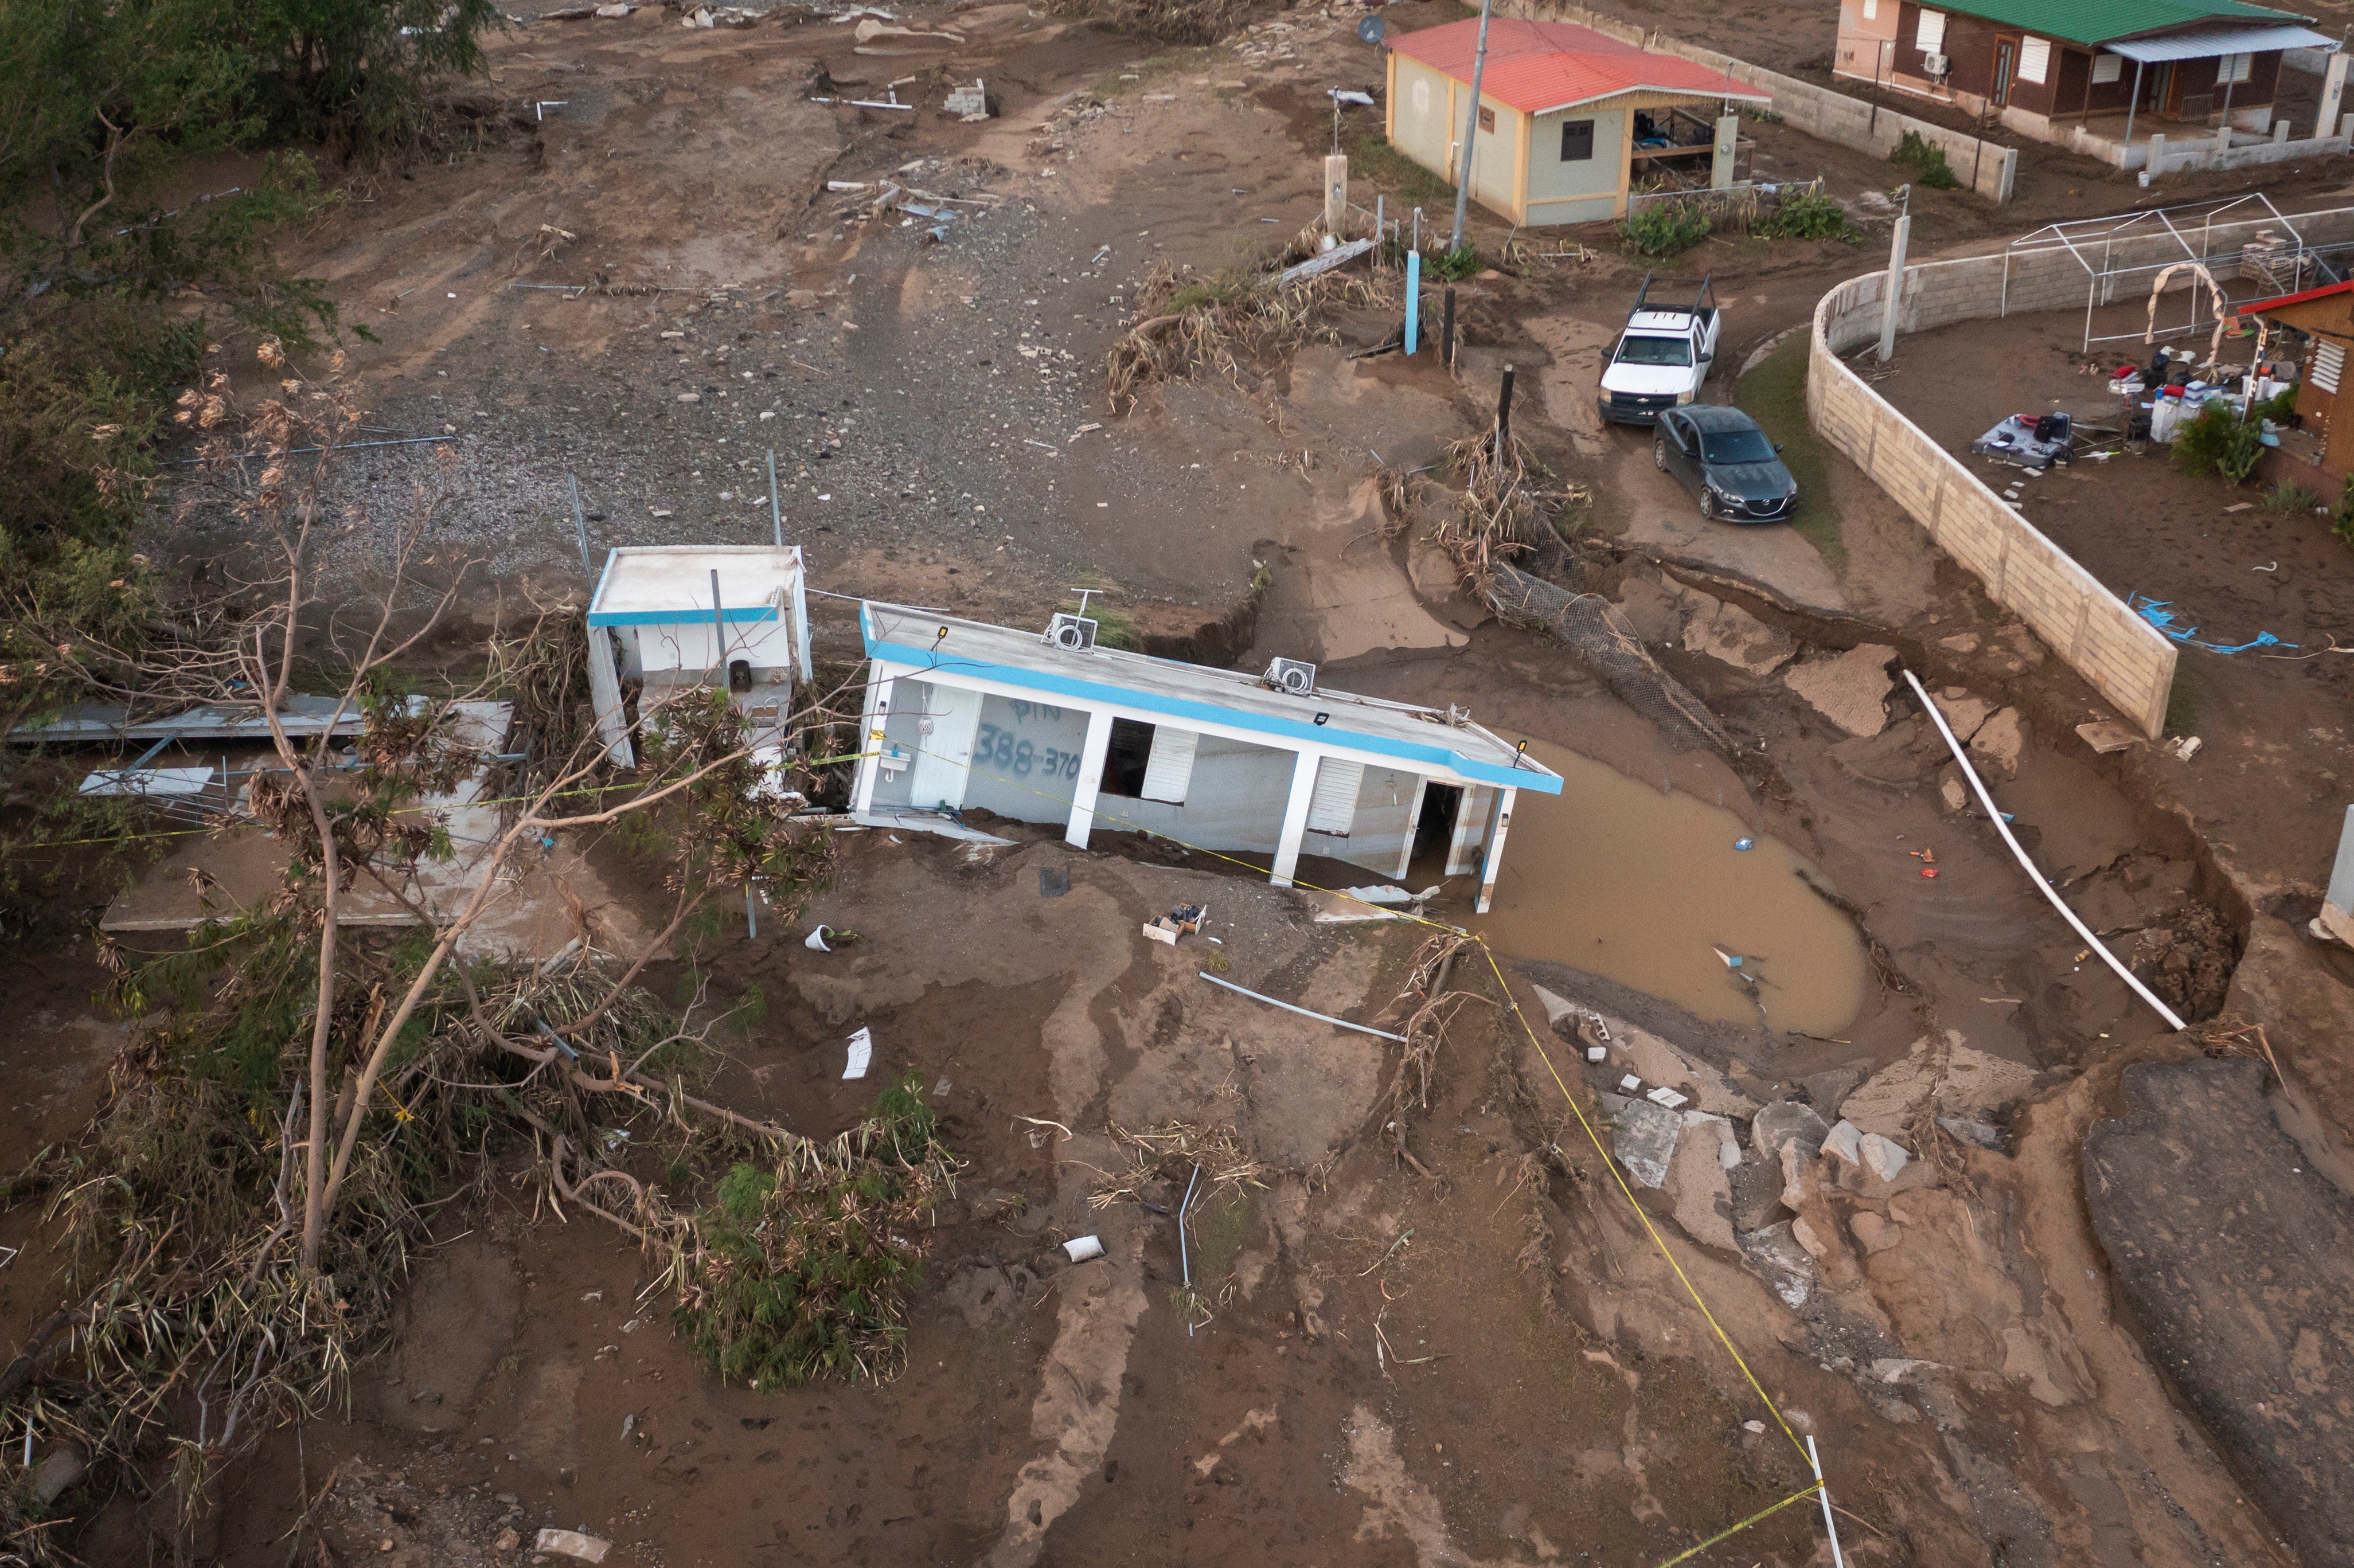 A house lies in the mud after it was washed away by Hurricane Fiona in Salinas, Puerto Rico, on 21 September 2022